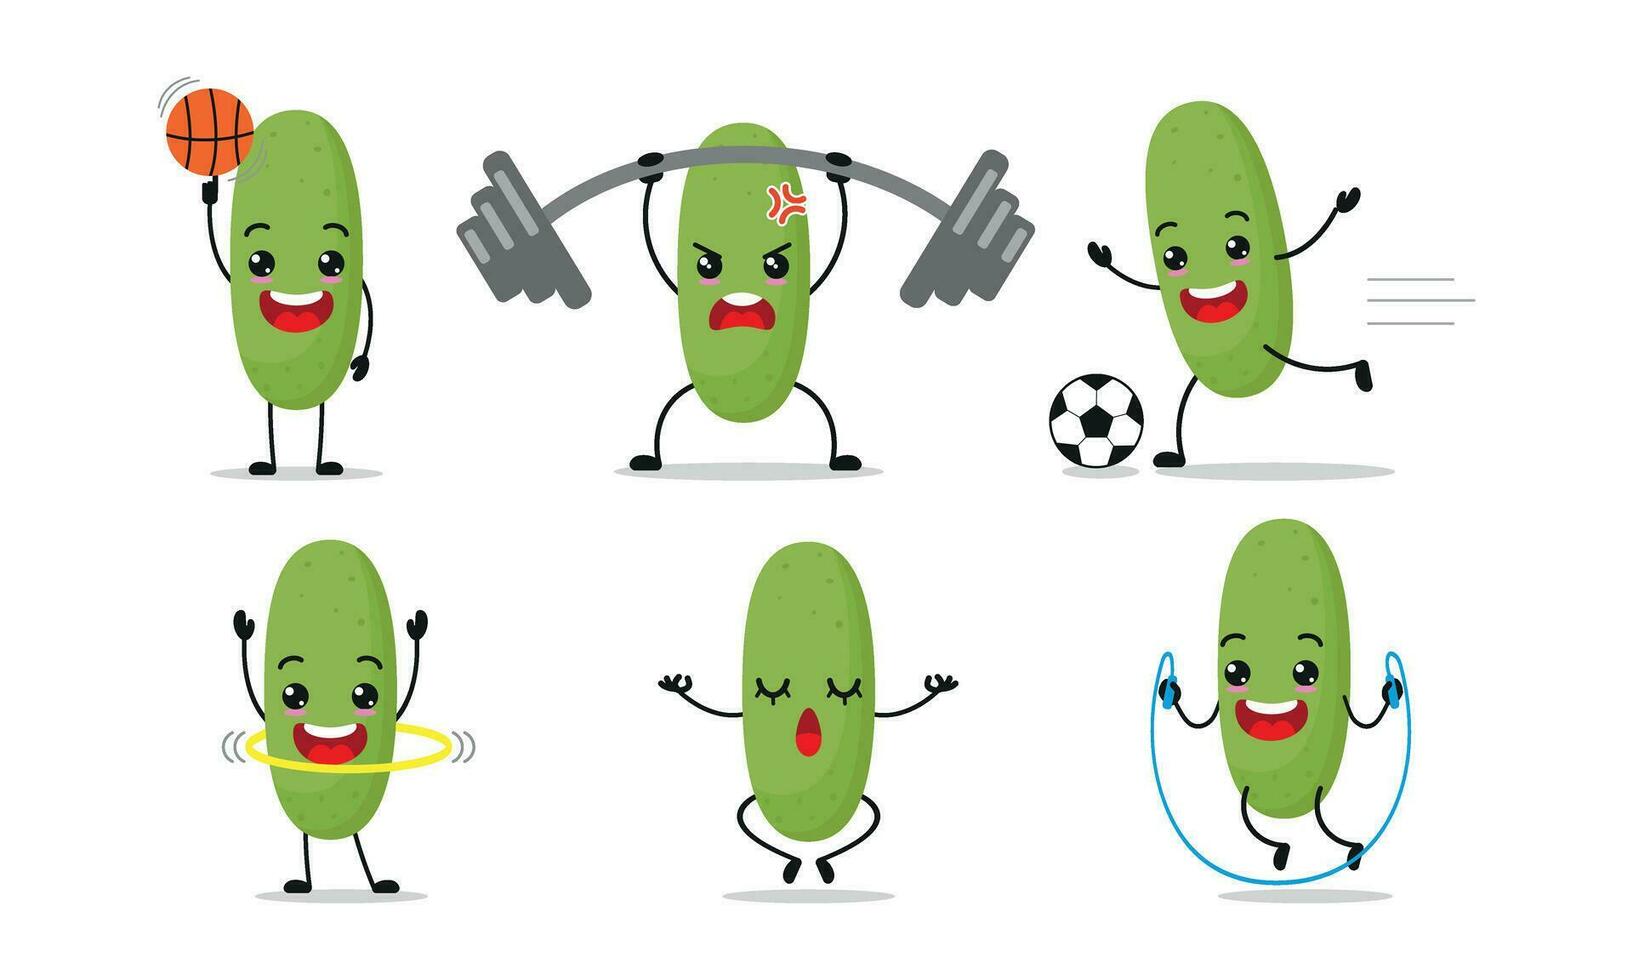 Cucumber Exercise Different Sport Activity Vector Illustration Sticker. Zucchini Many Face expression set.